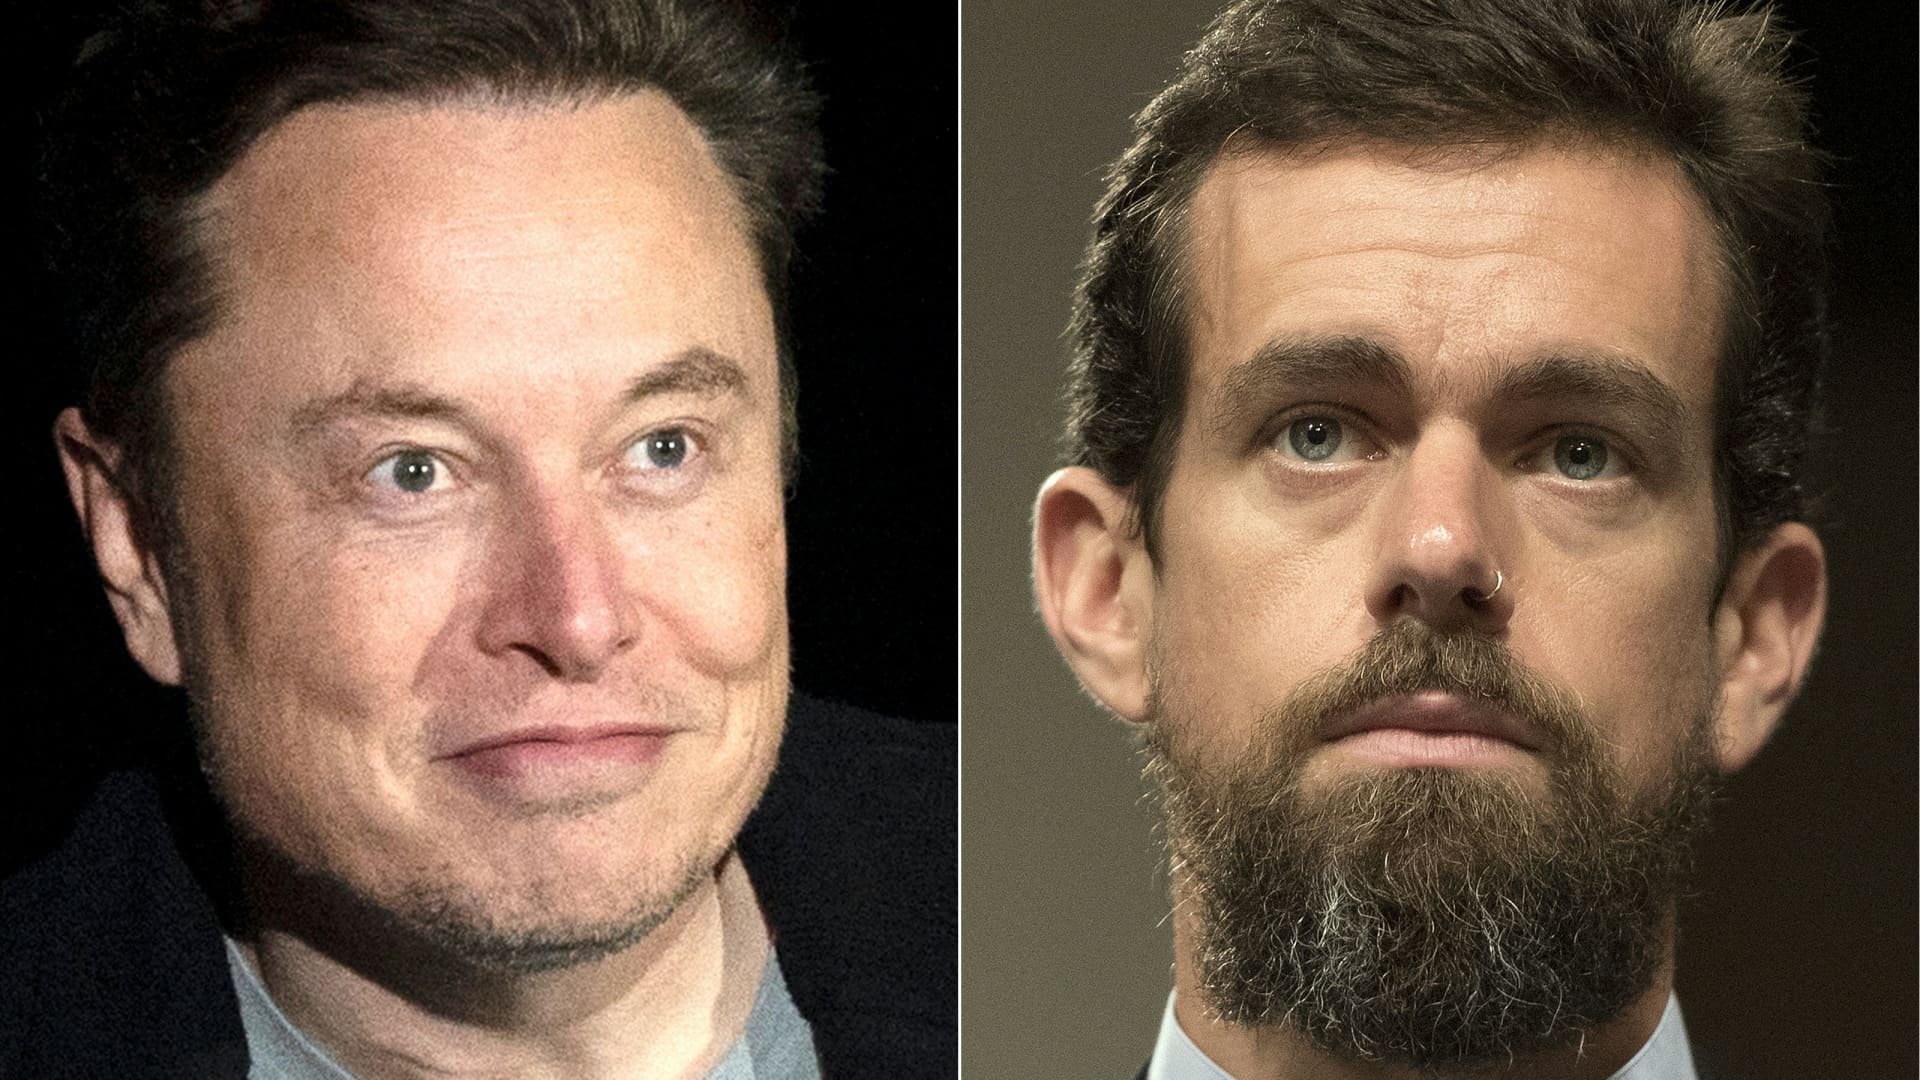 Dorsey wanted Musk on Twitter board, but directors were 'risk averse'